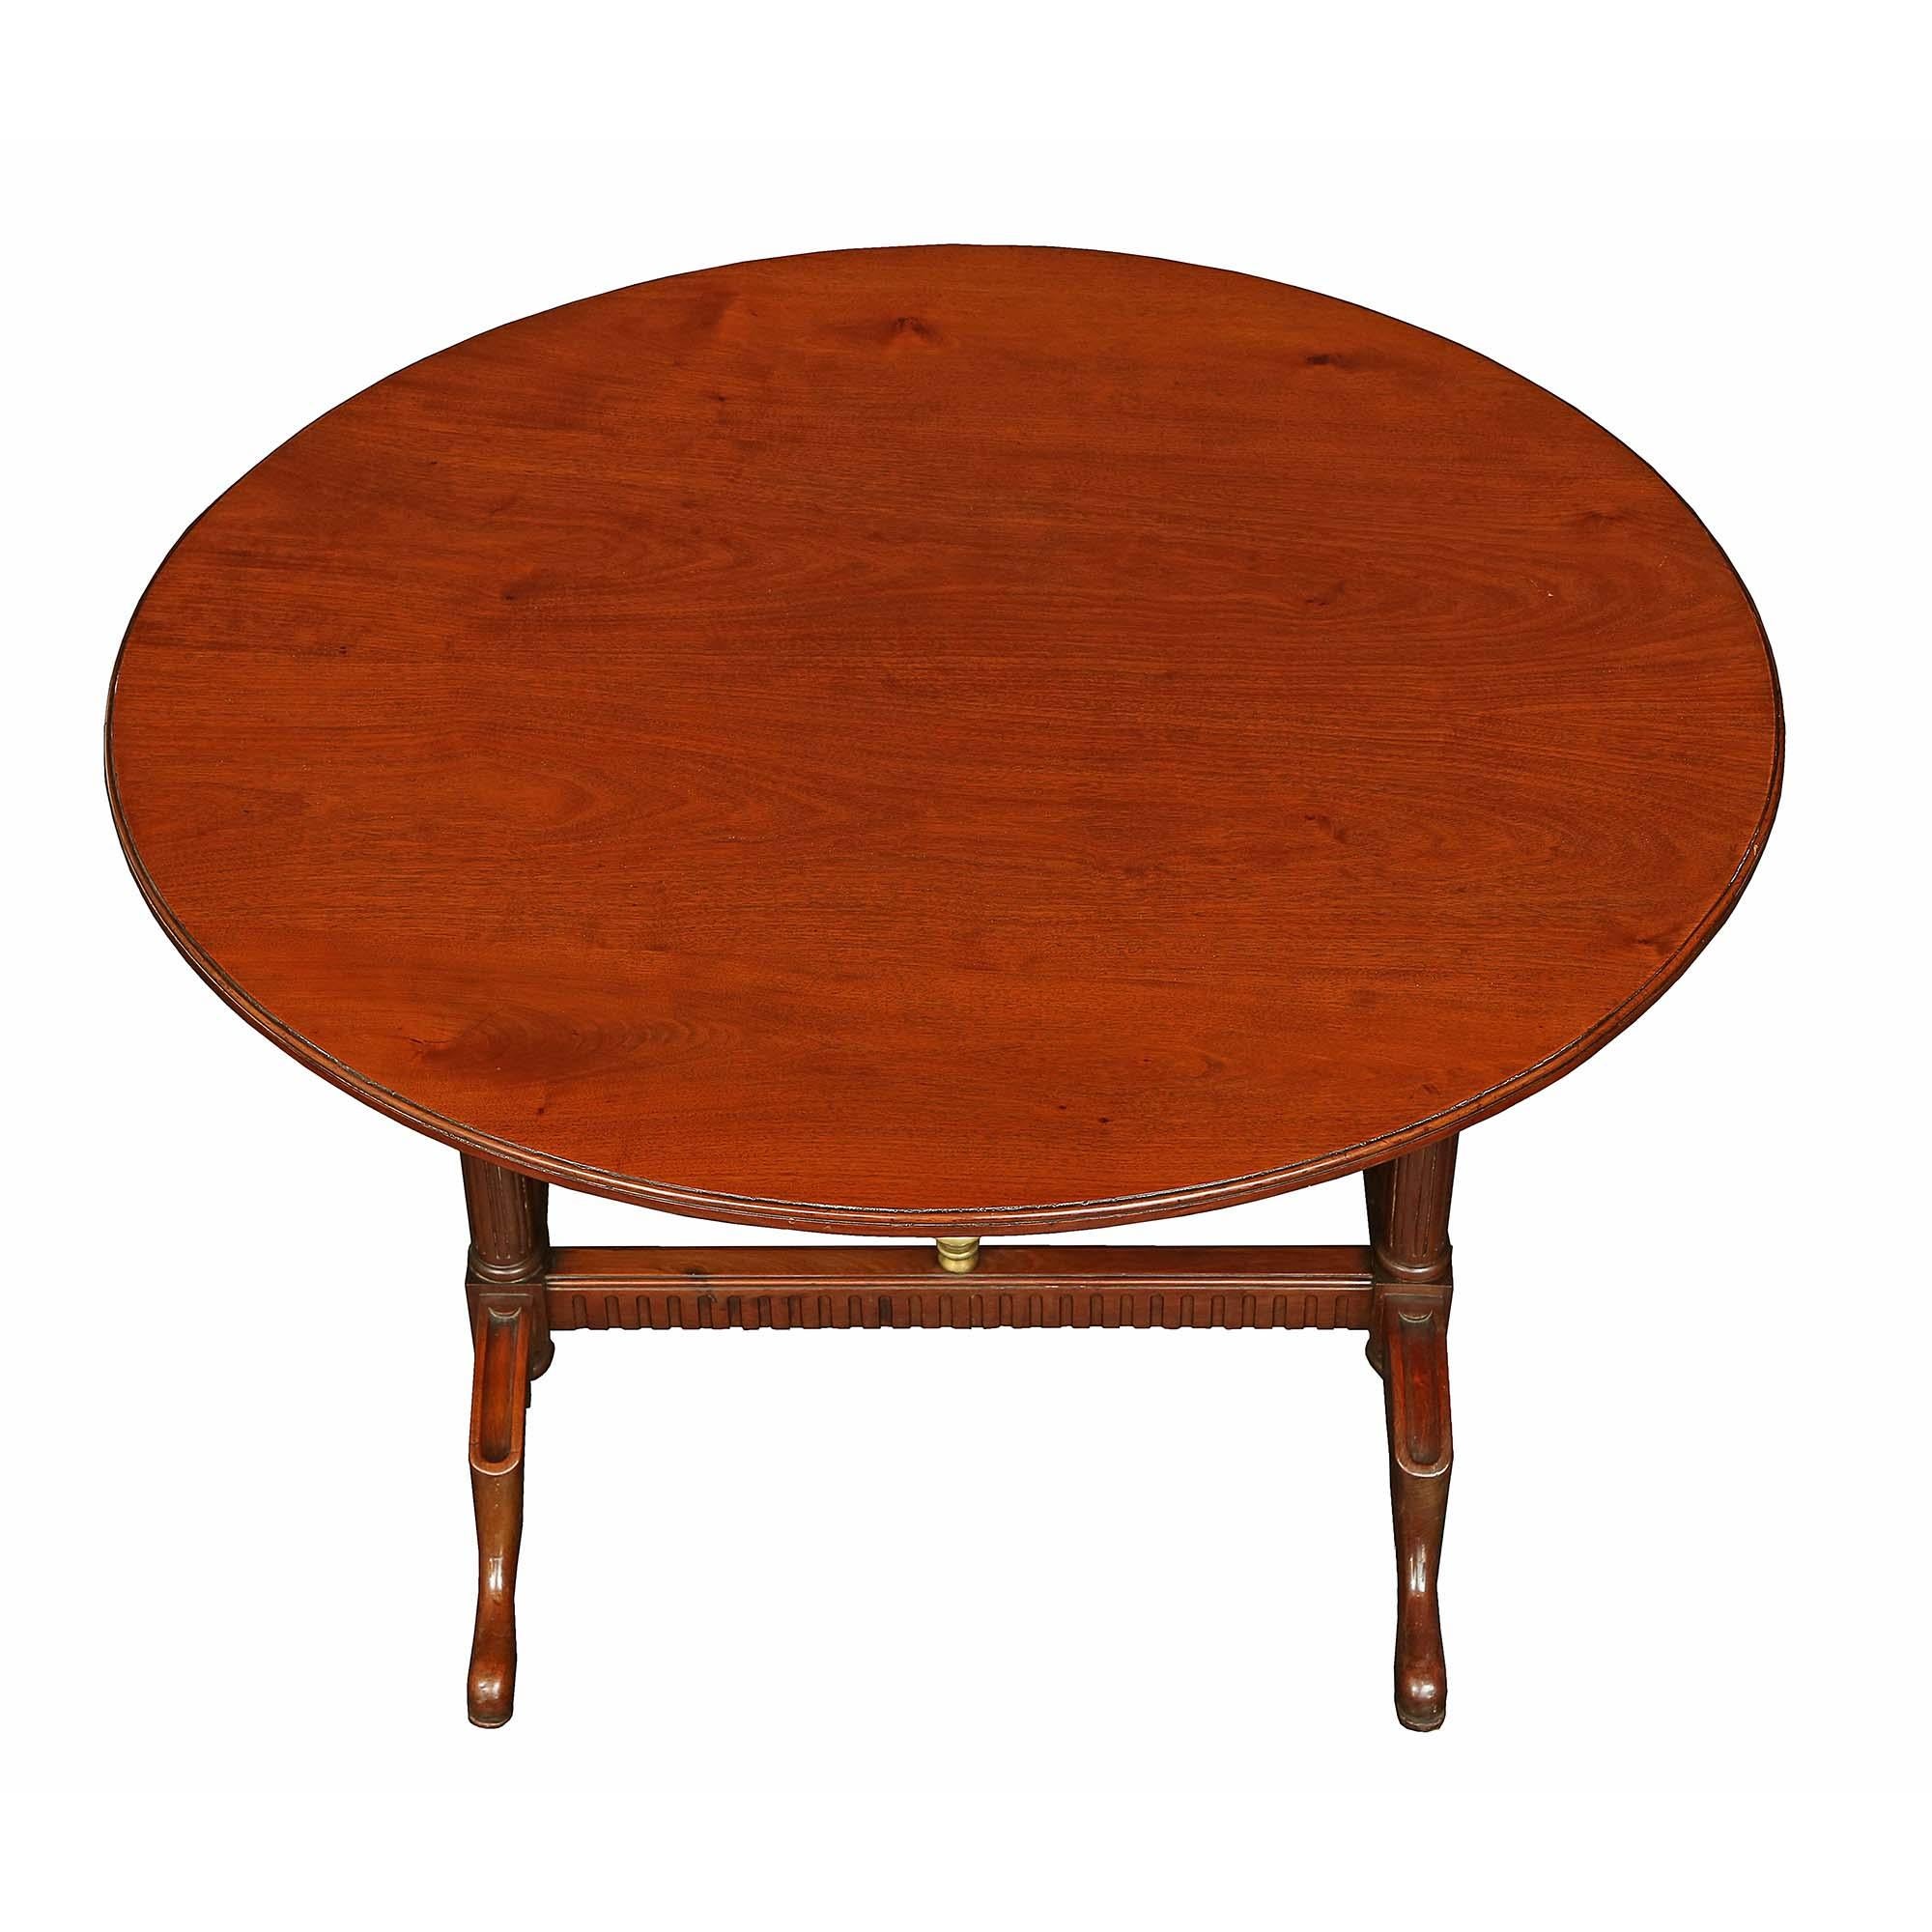 A very attractive French early 19th century Louis XVI st. solid mahogany gateleg table. The table is raised on reeded legs resting on trestle feet centered by an inverted finial and joined by a reeded stretcher. The central curved gate is hinged to